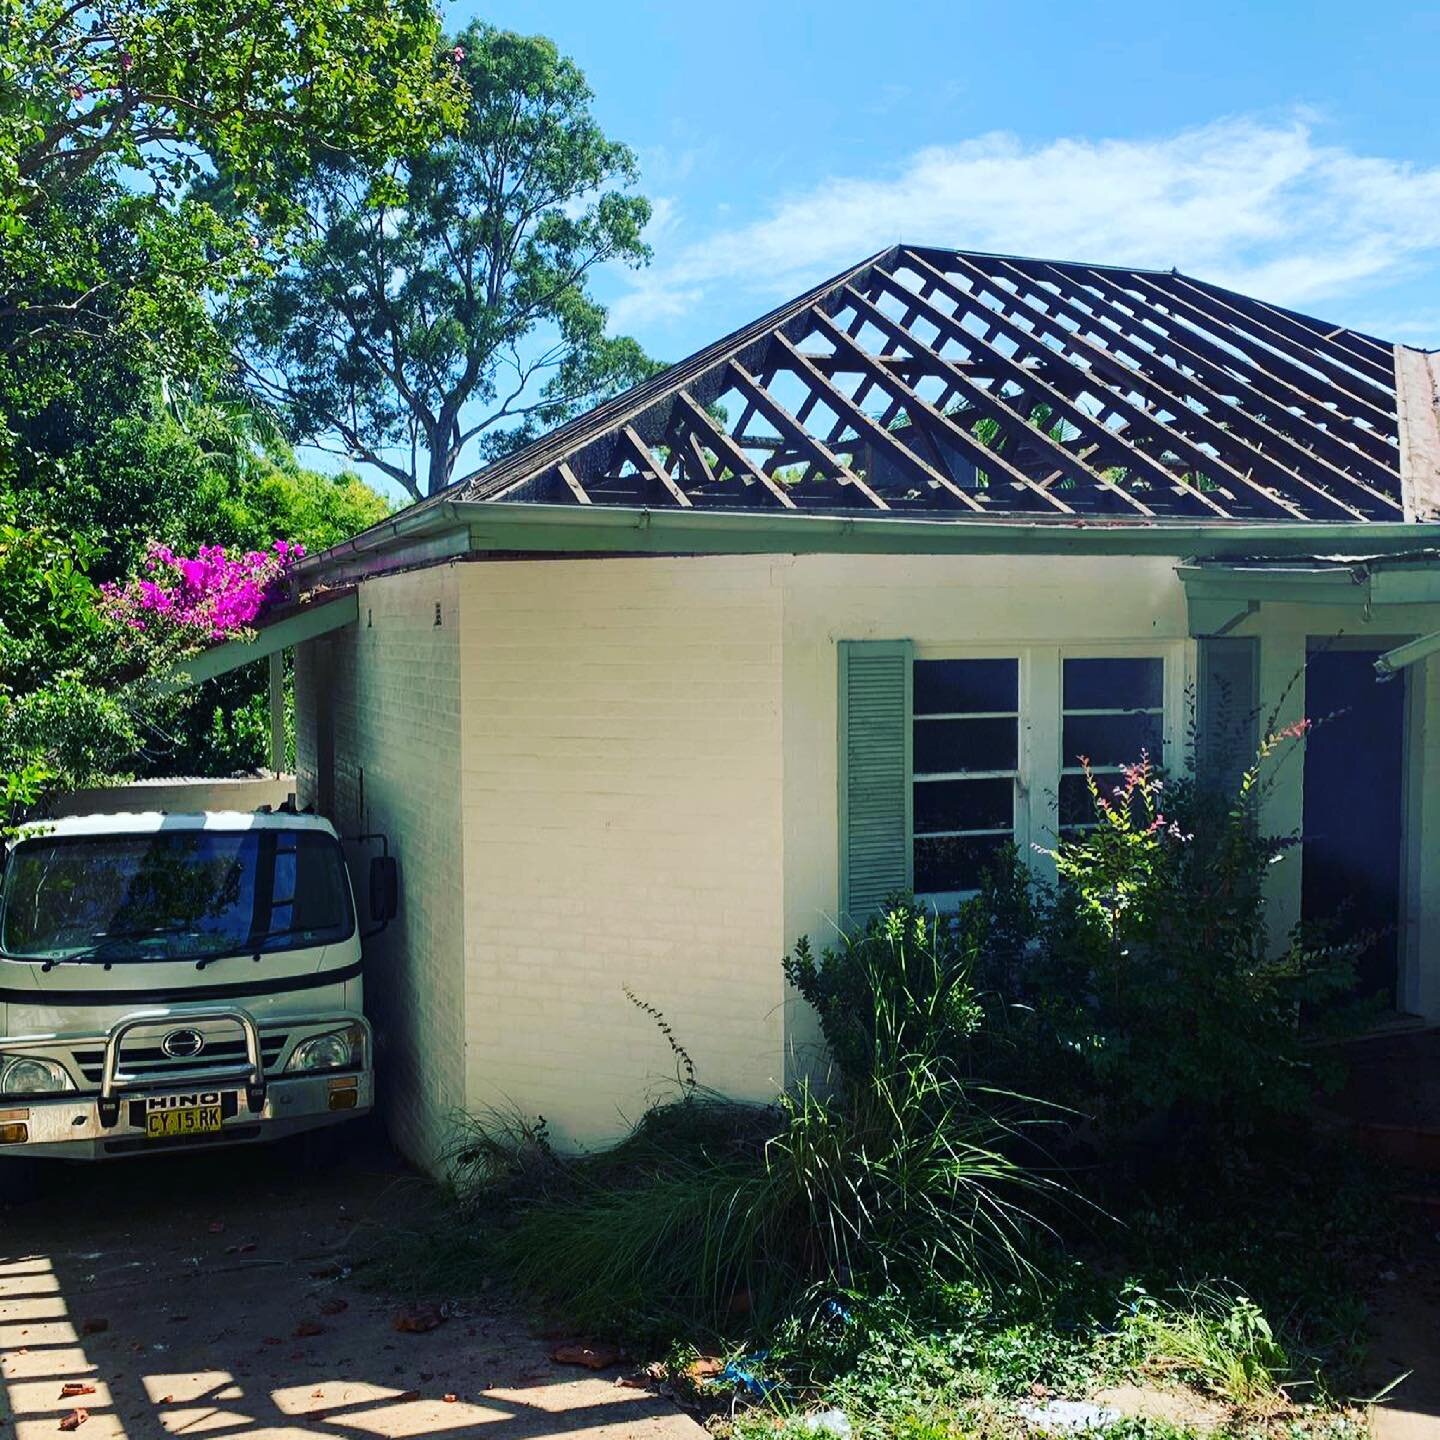 House strip out done beautifully for our client in Lane Cove 🛠🚜
.
.
.
.
.
.
.
.

#renovation #reno #renovationproject #renovations #garagereno #garagerenovation #homerenovations #renovationideas #garagedemolition #garagedemo #asbestosawareness #asb